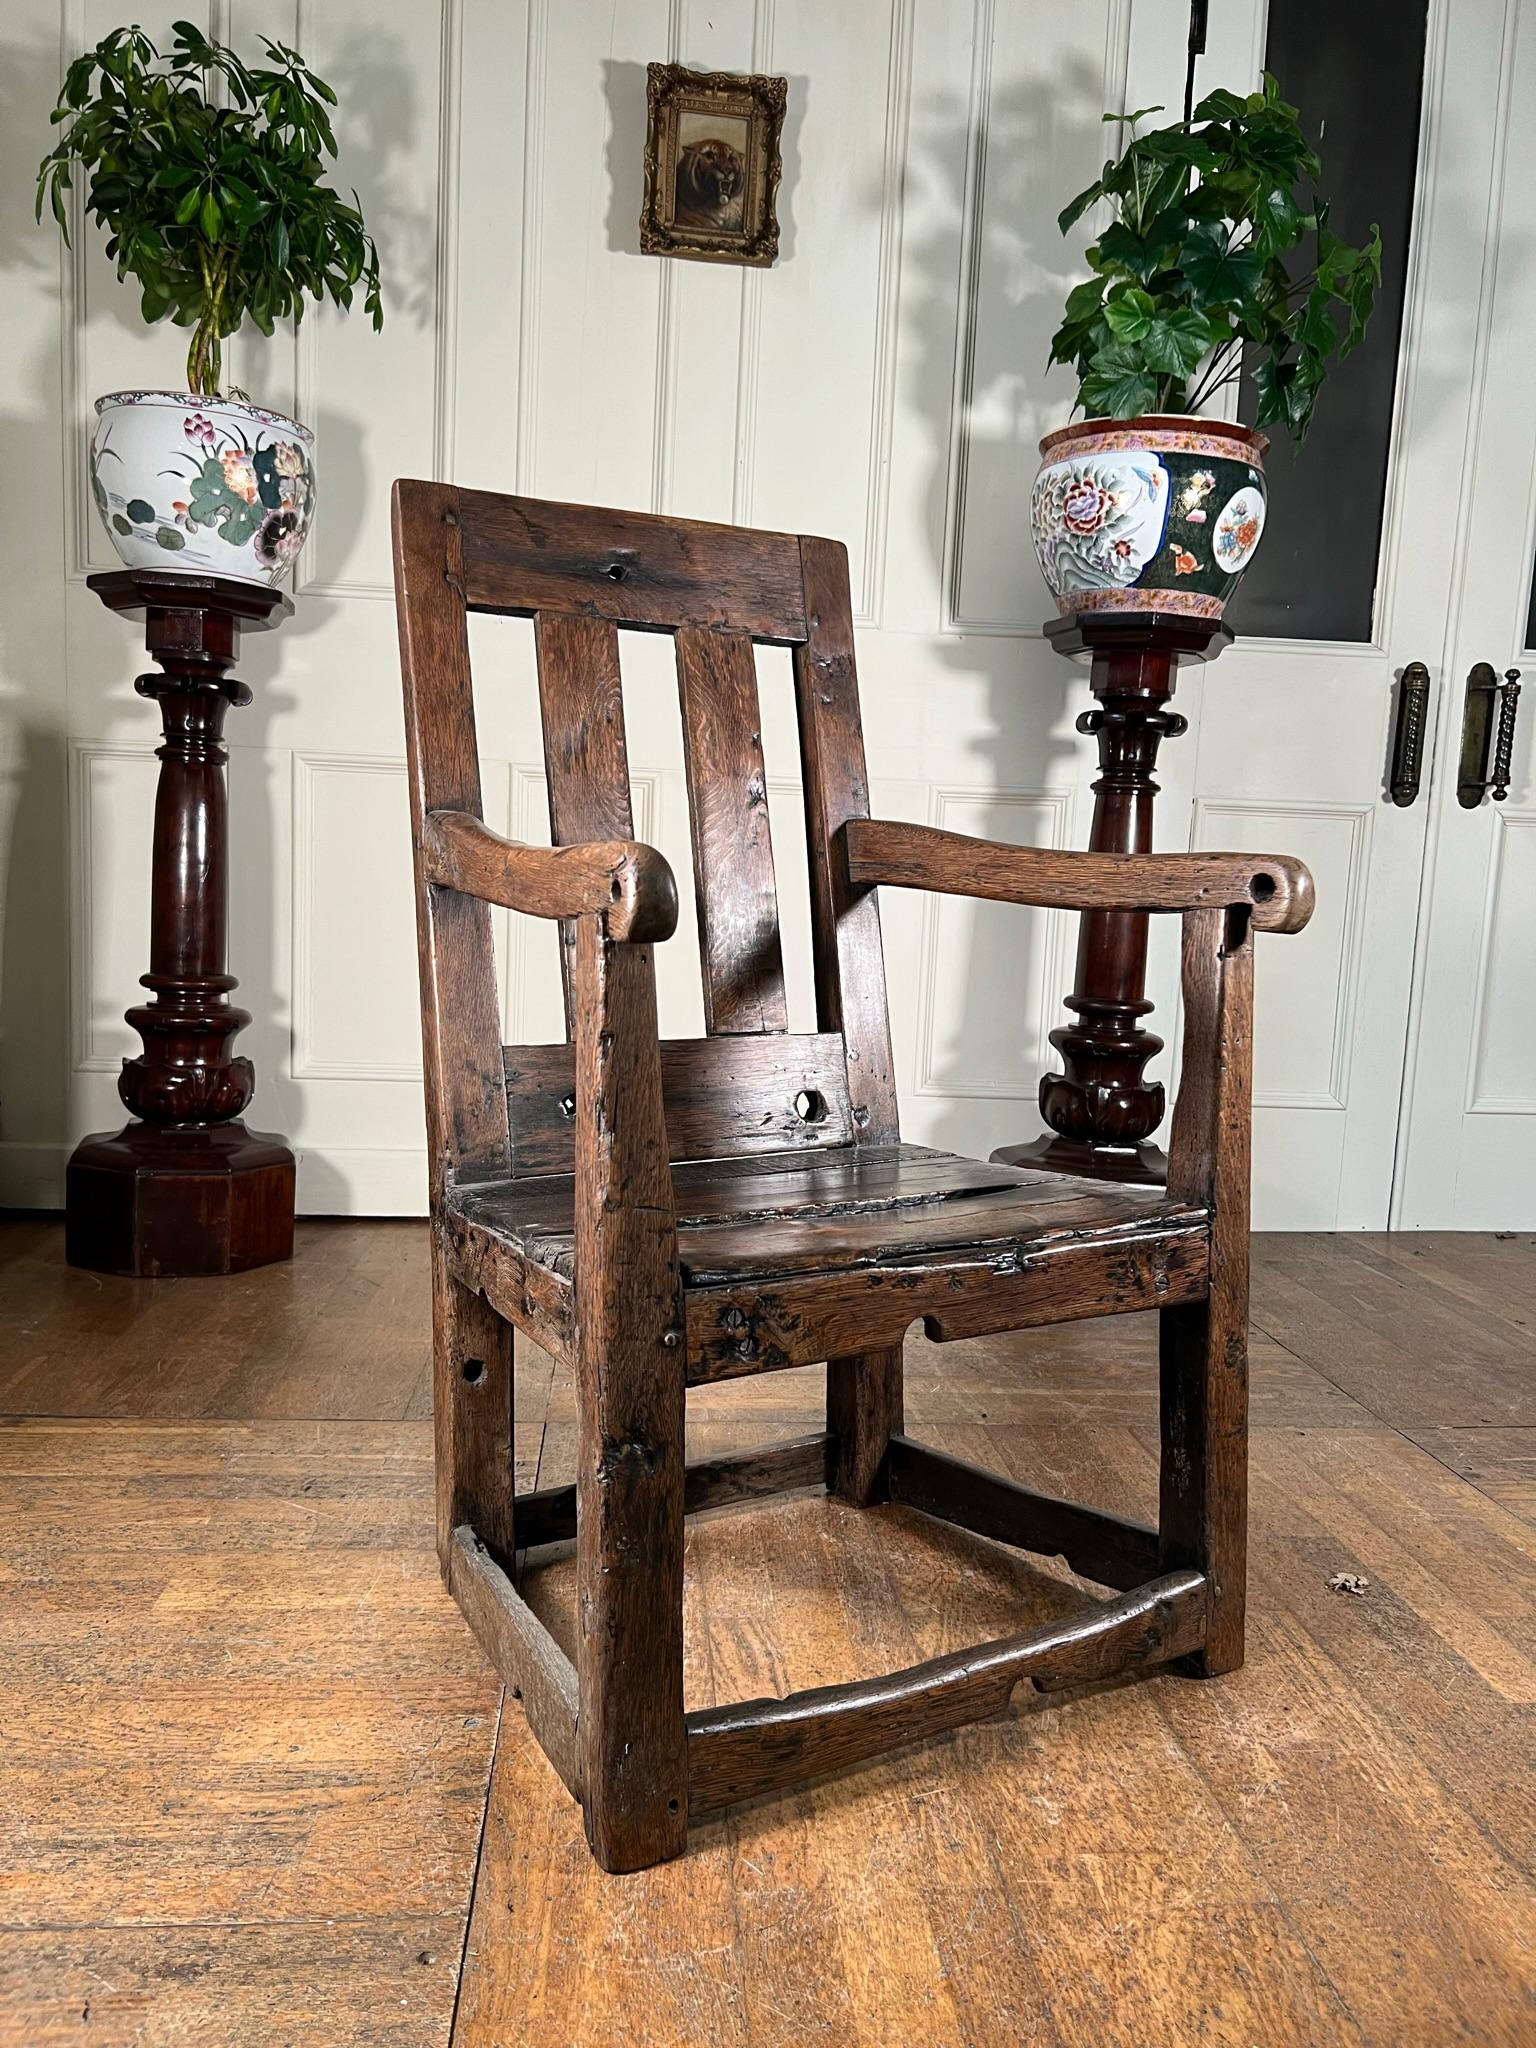 Made on the Isle of Man, from 'reclaimed' or 'found' timbers, this chair was used for restraining and is thought to be from an asylum or prison.

Constructed in the early 19th century, this is a truly rare and macabre item.

The chair comes with a